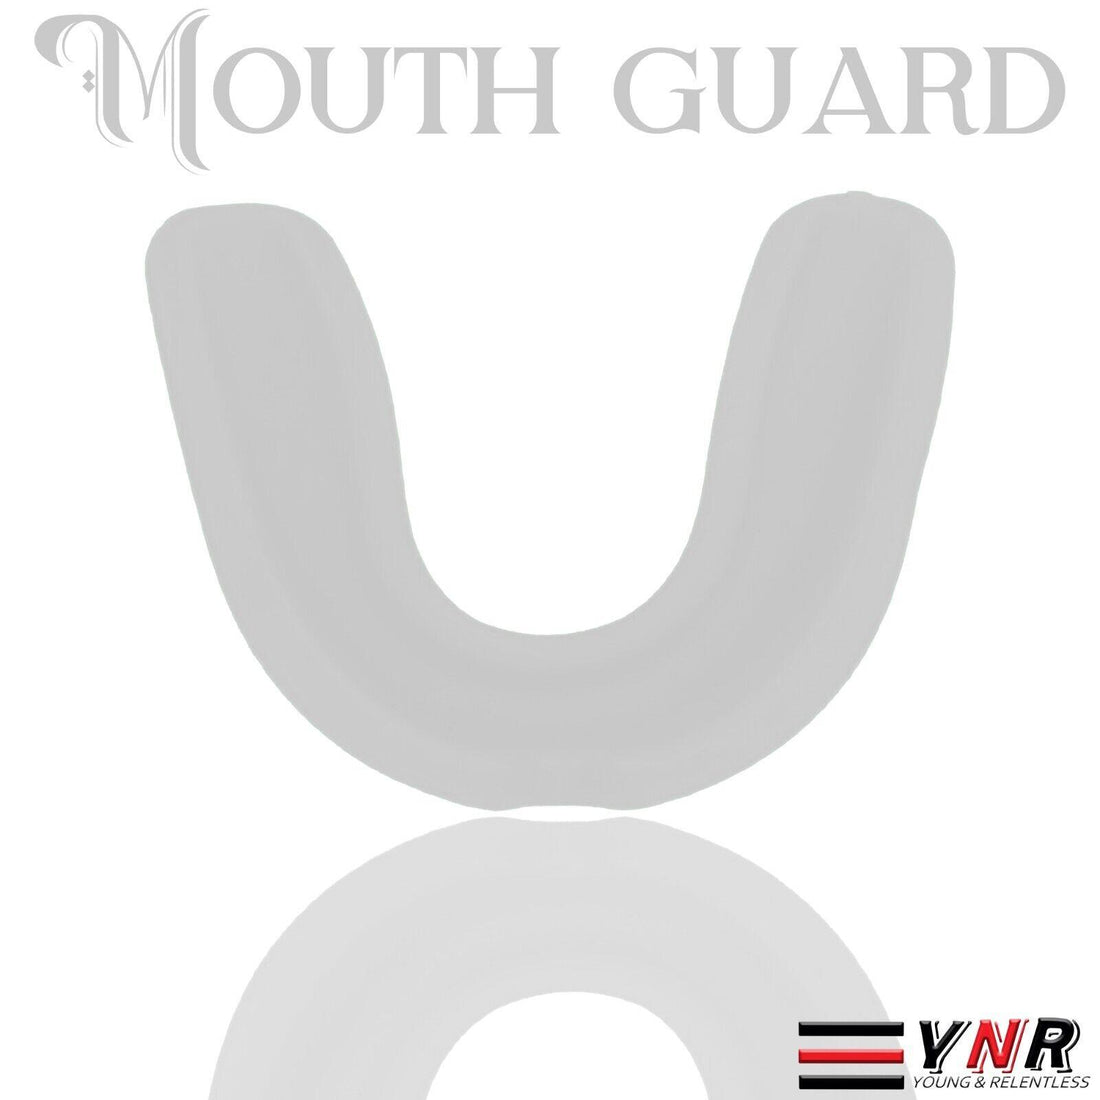 Mouth Guard Boxing MMA Karate Rugby Kids Adults Gum Shield Teeth Protection